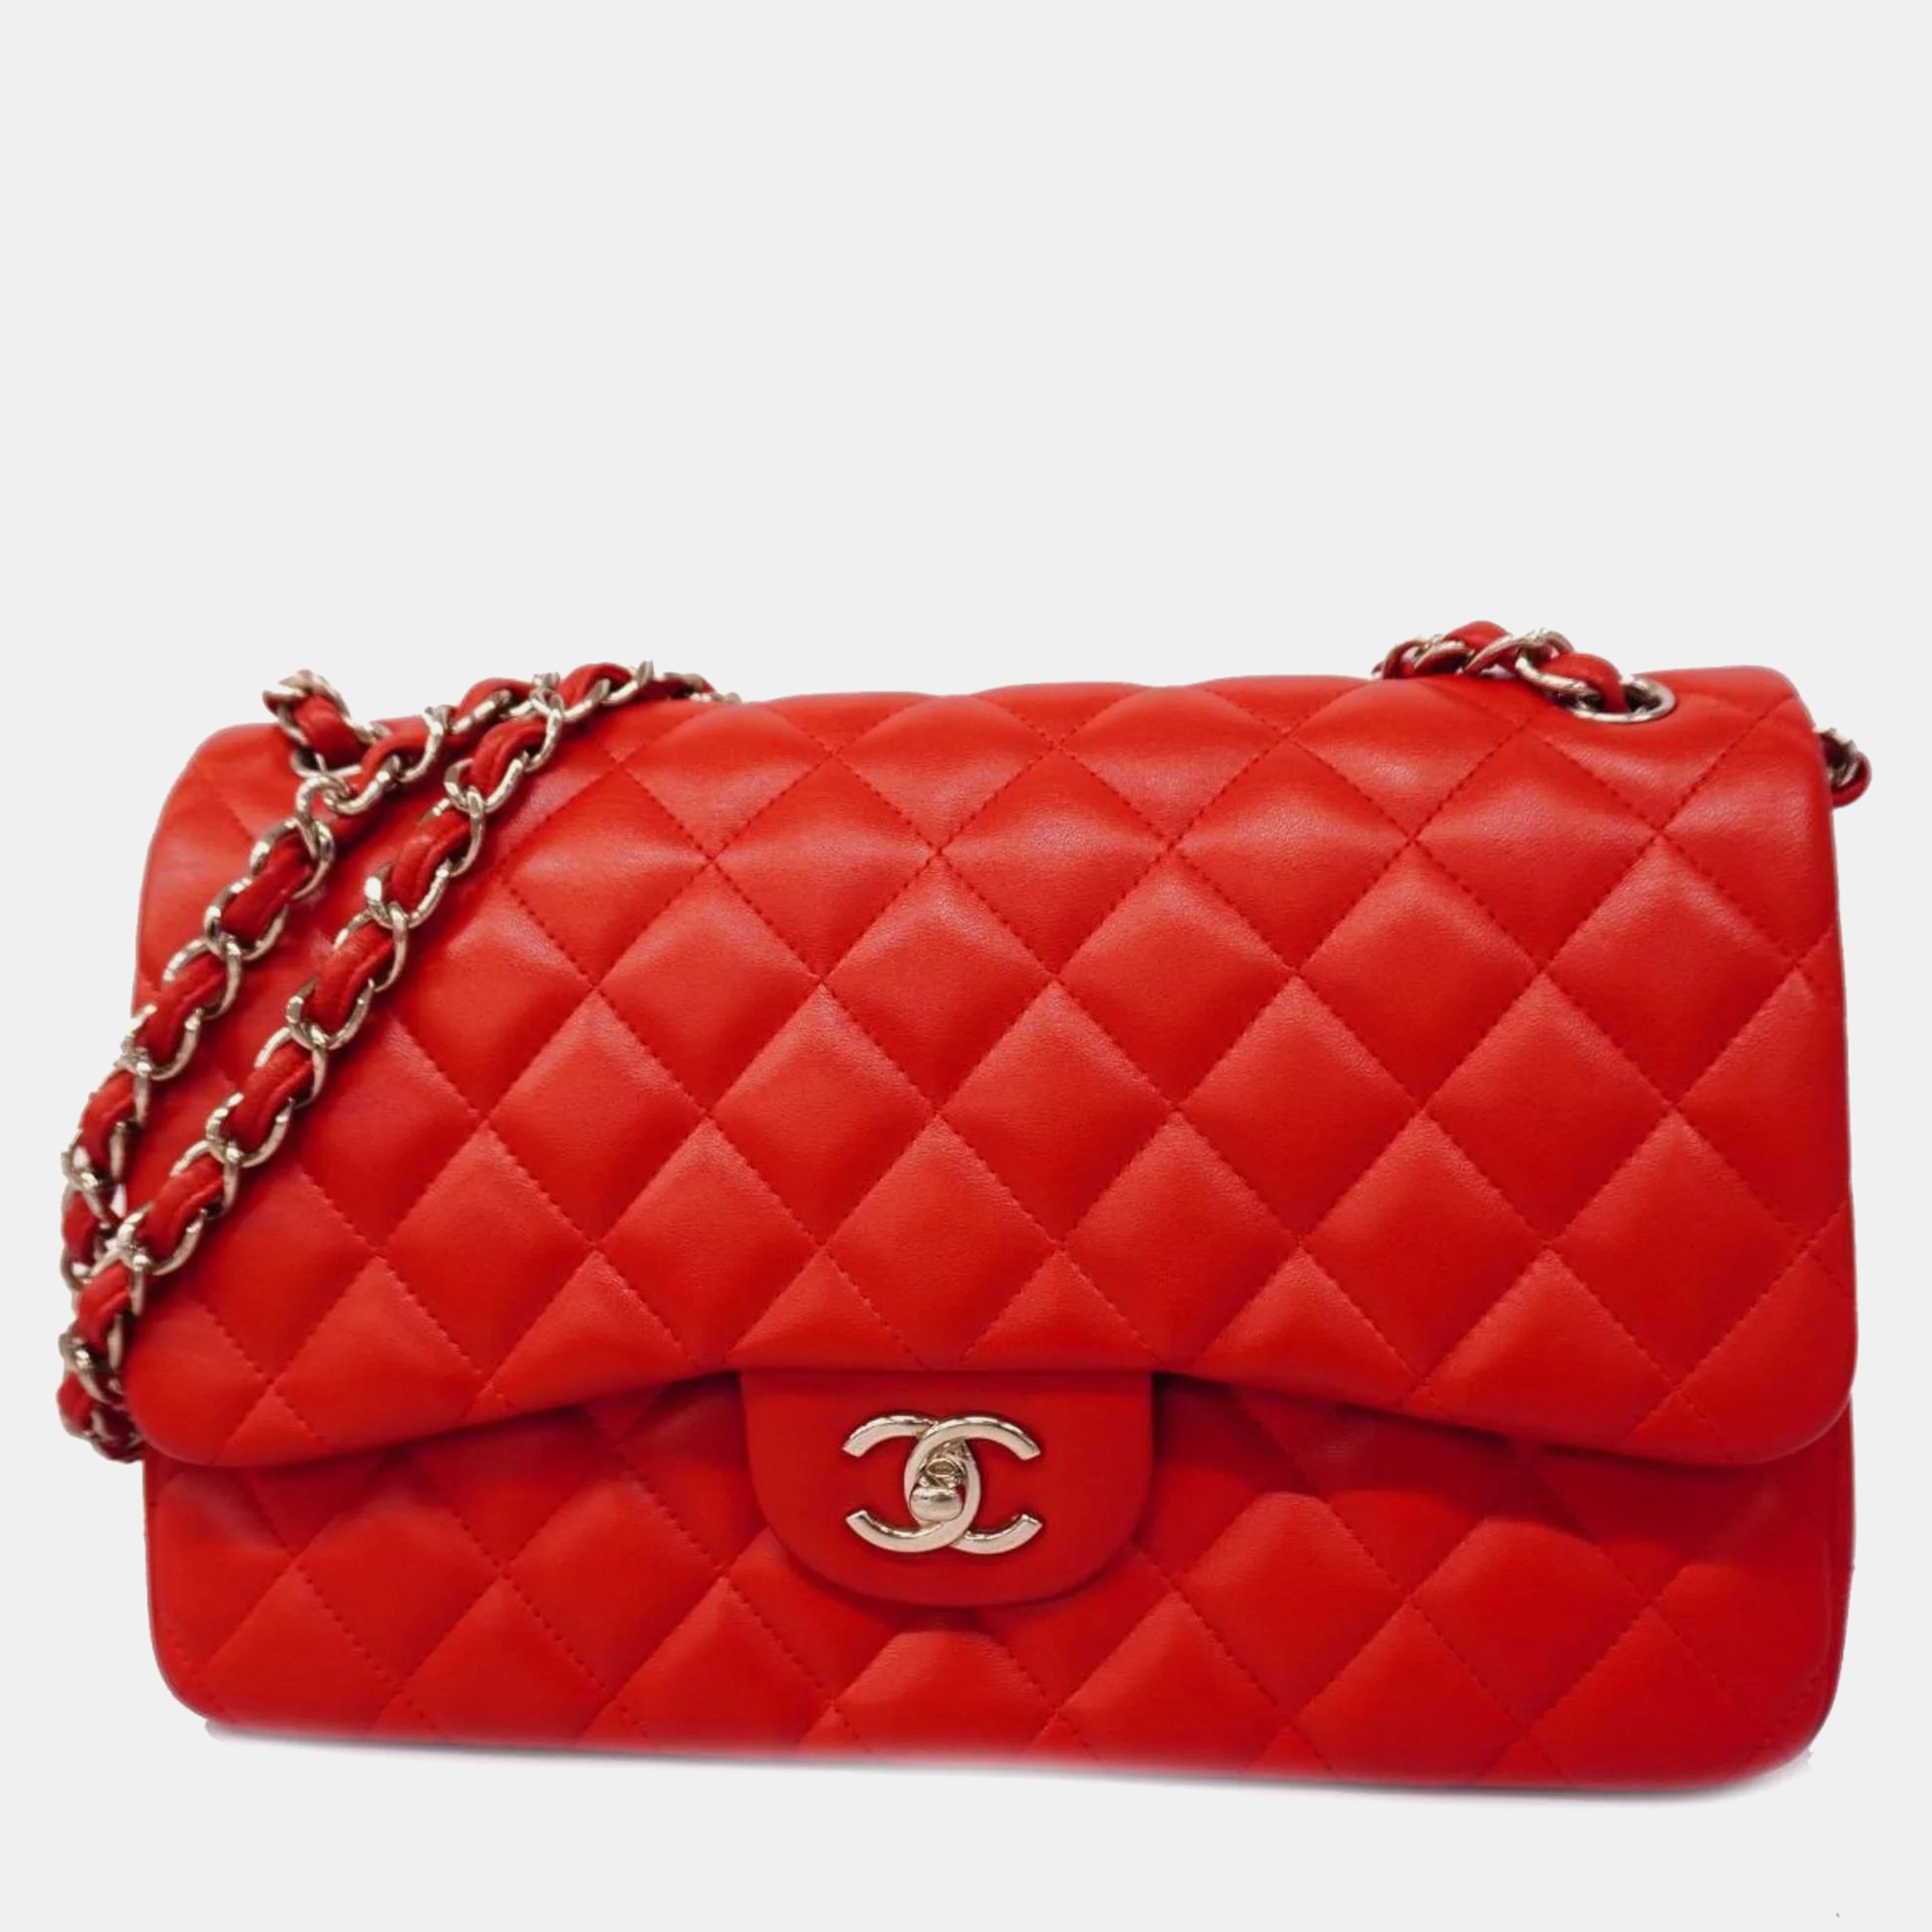 

Chanel Lambskin Leather Jumbo Classic Double Flap Shoulder Bags, Red